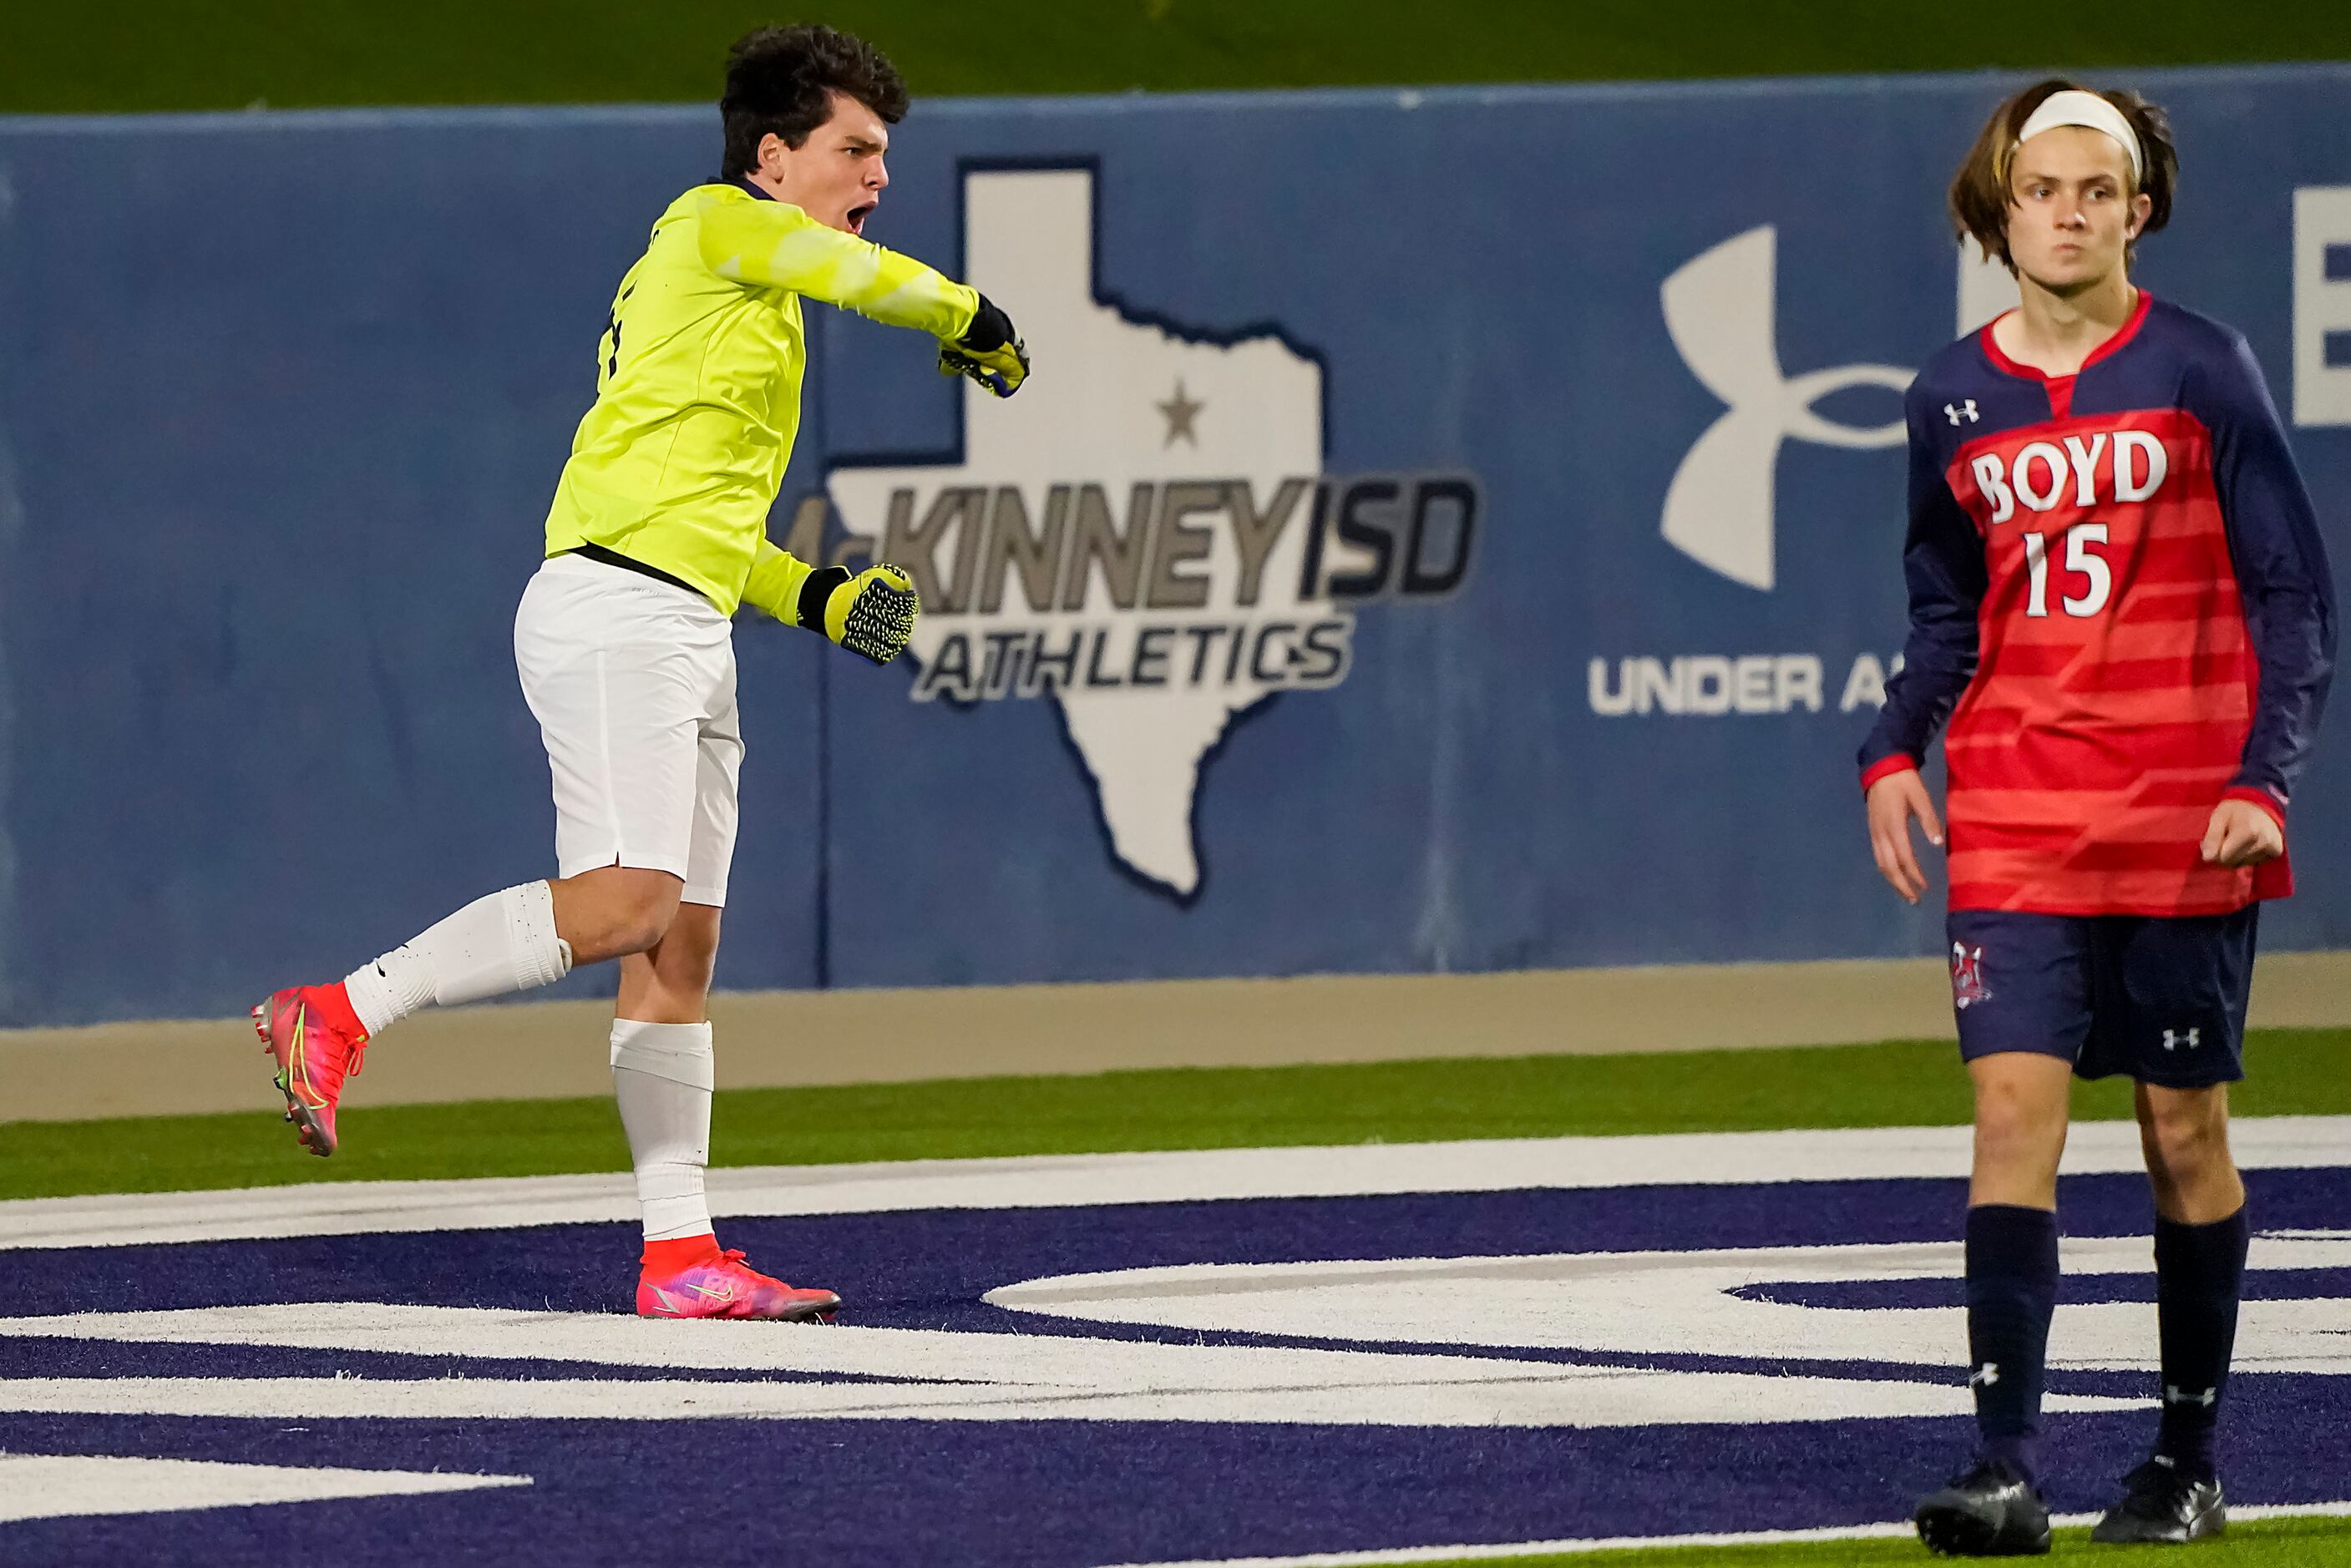 Jesuit goalkeeper Cole Hines celebrates after making a save on a shot by McKinney Boyd...